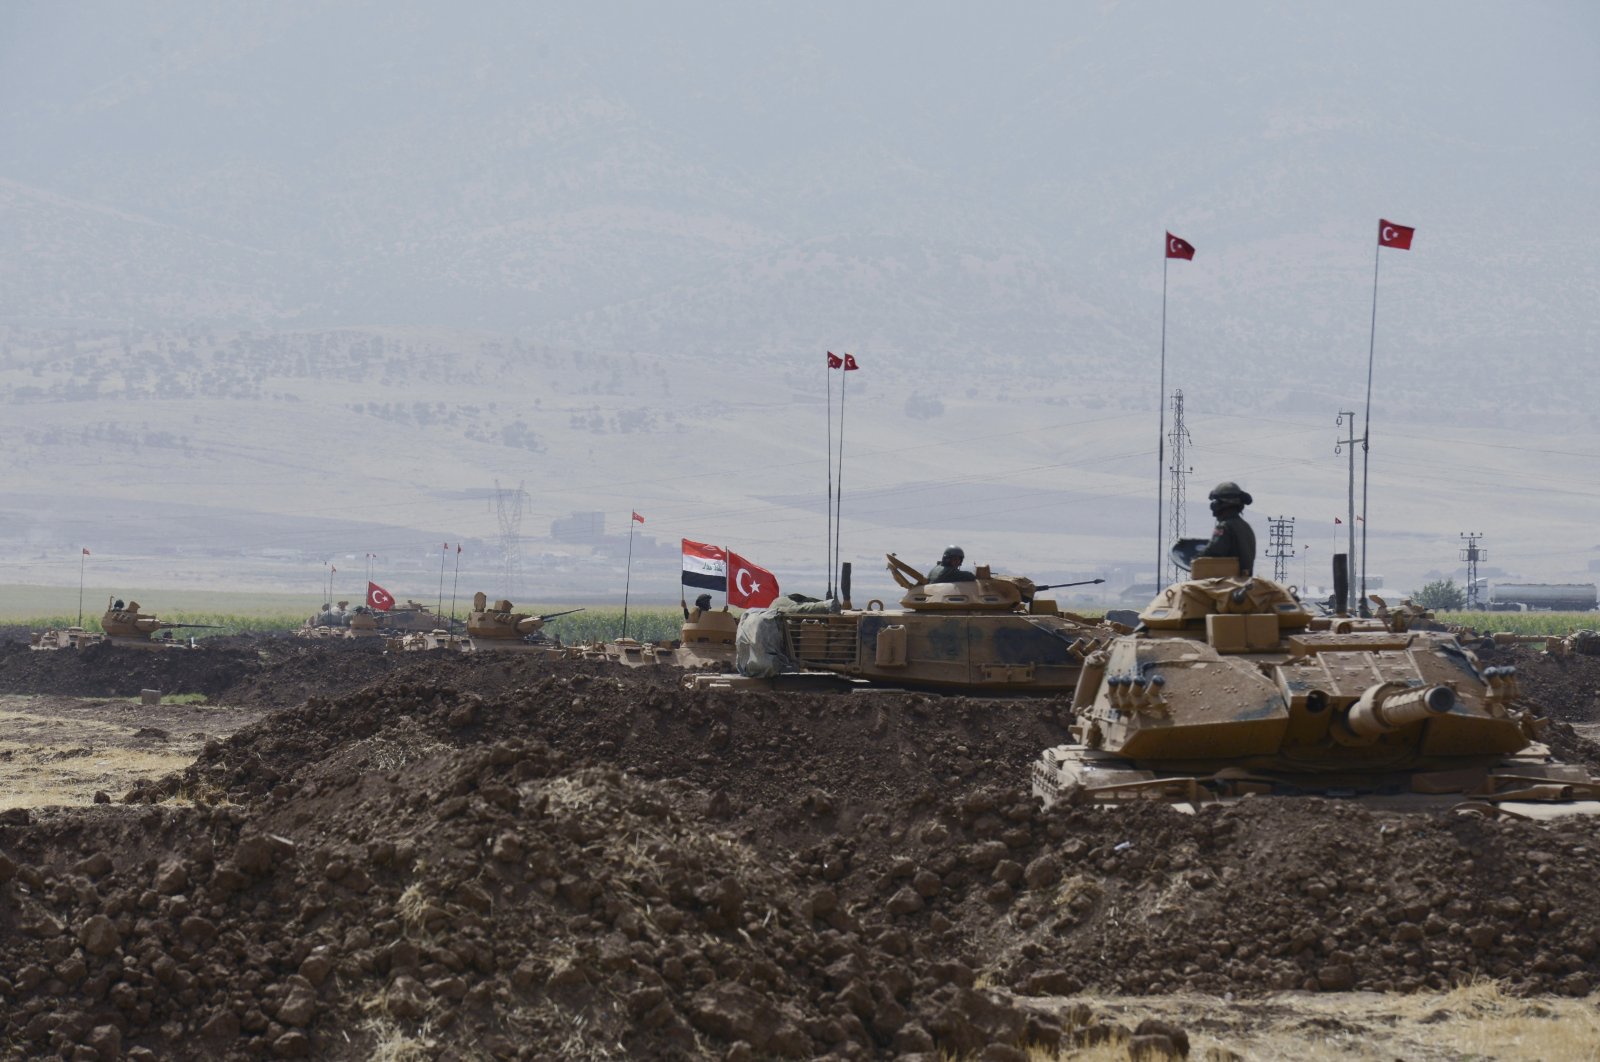 Turkish and Iraqi soldiers sit on Turkish tanks during exercises in Silopi, near the Habur border gate with Iraq, southeastern Turkey, Sept. 26, 2017. (DHA-Depo Photos via AP)